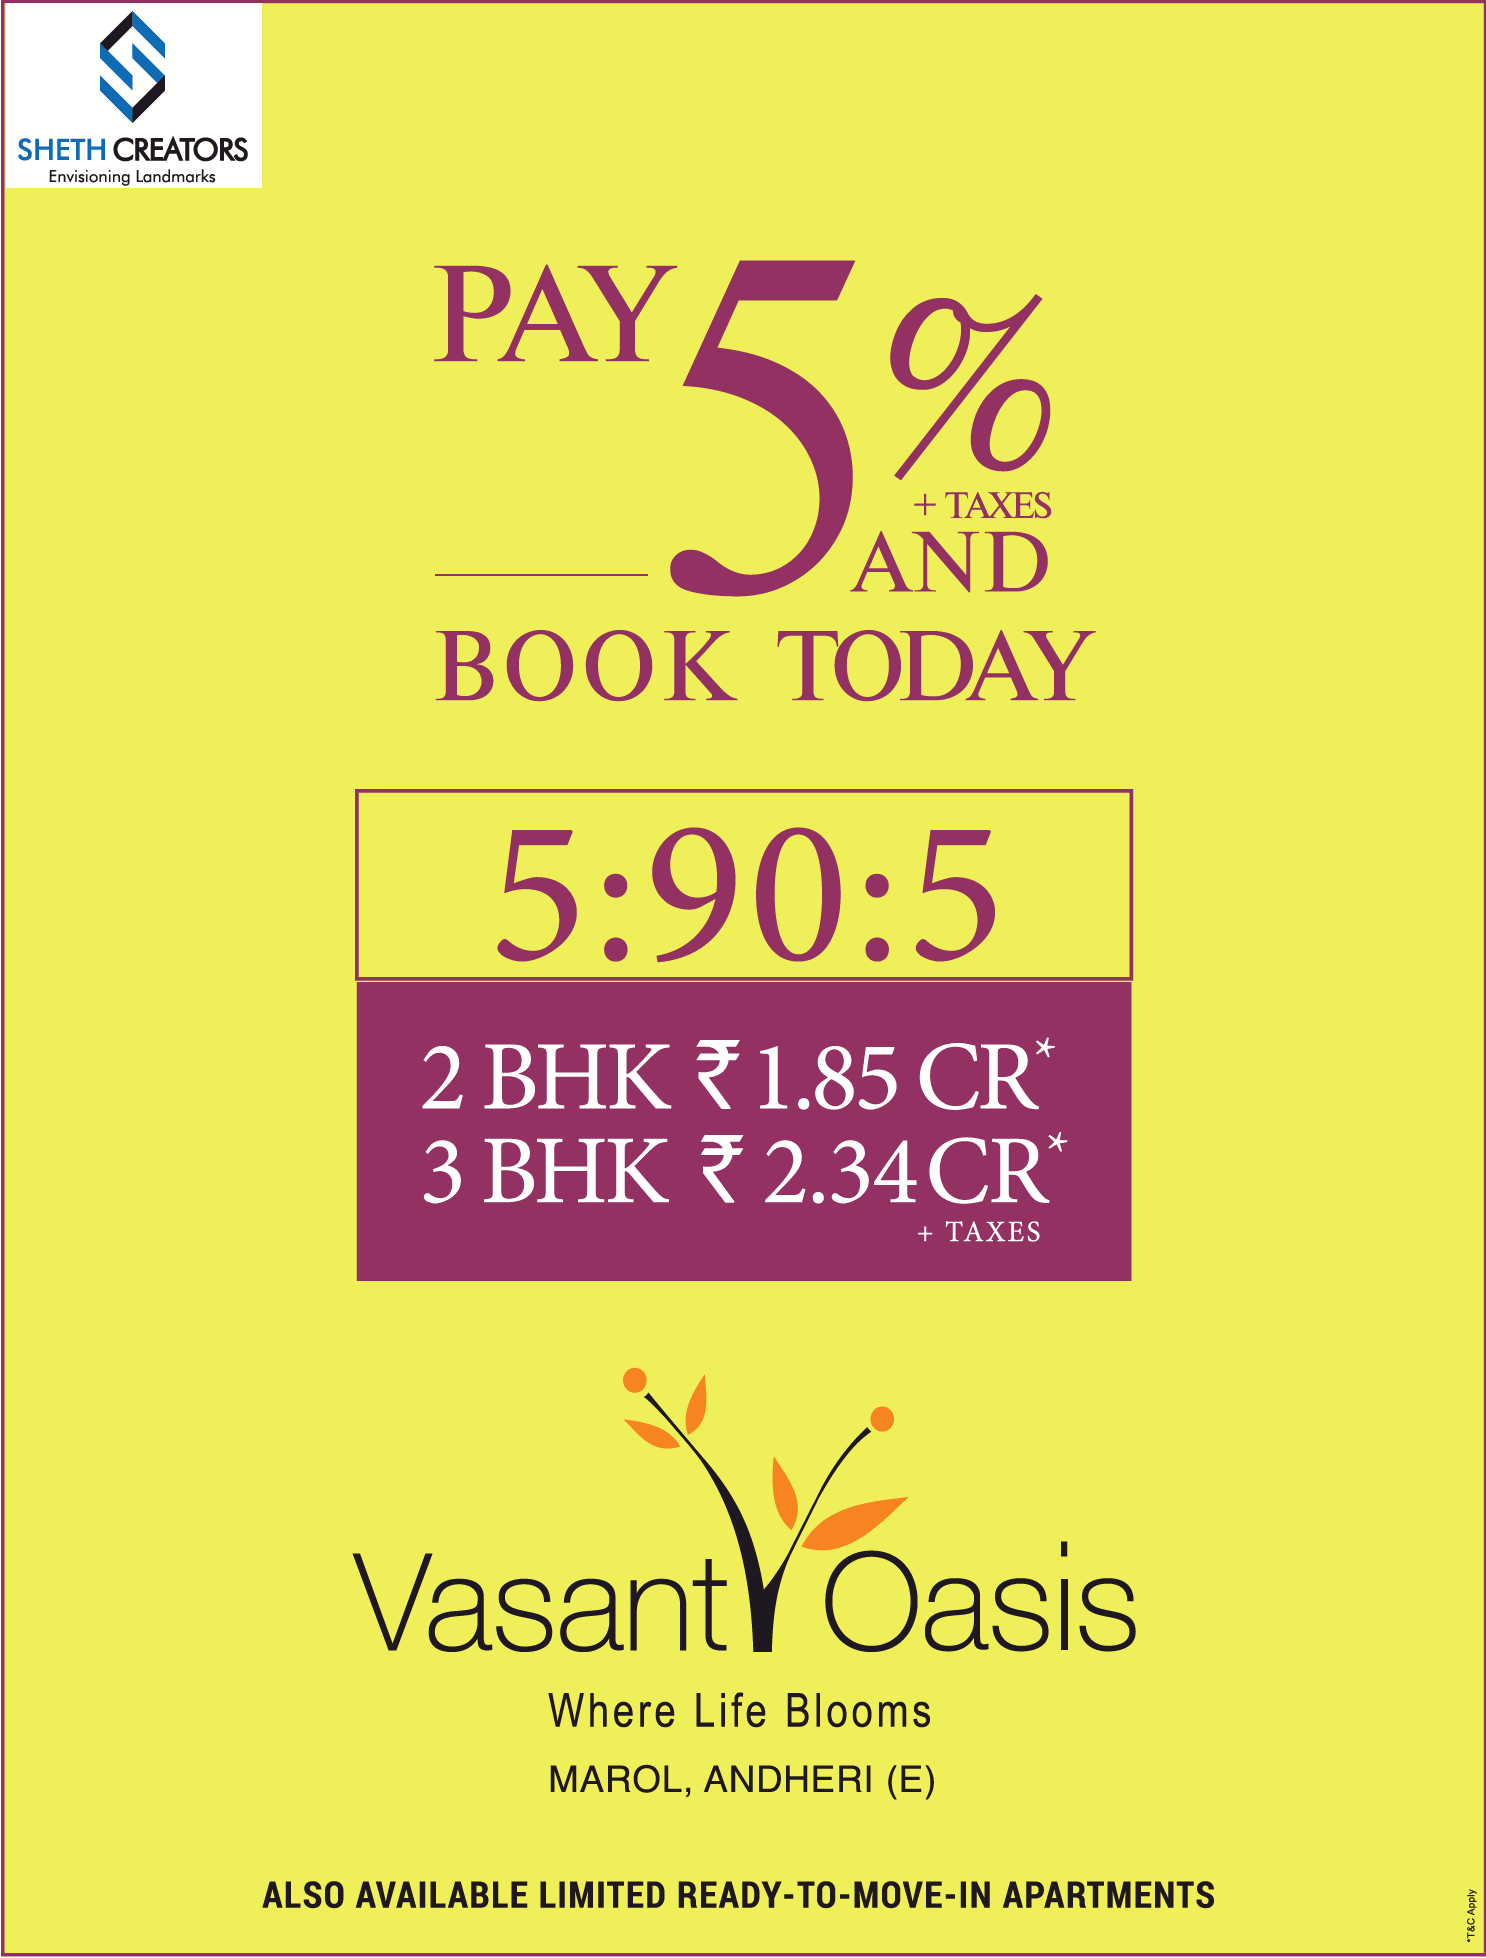 Pay 5% + taxes & book today at Vasant Oasis in Mumbai Update